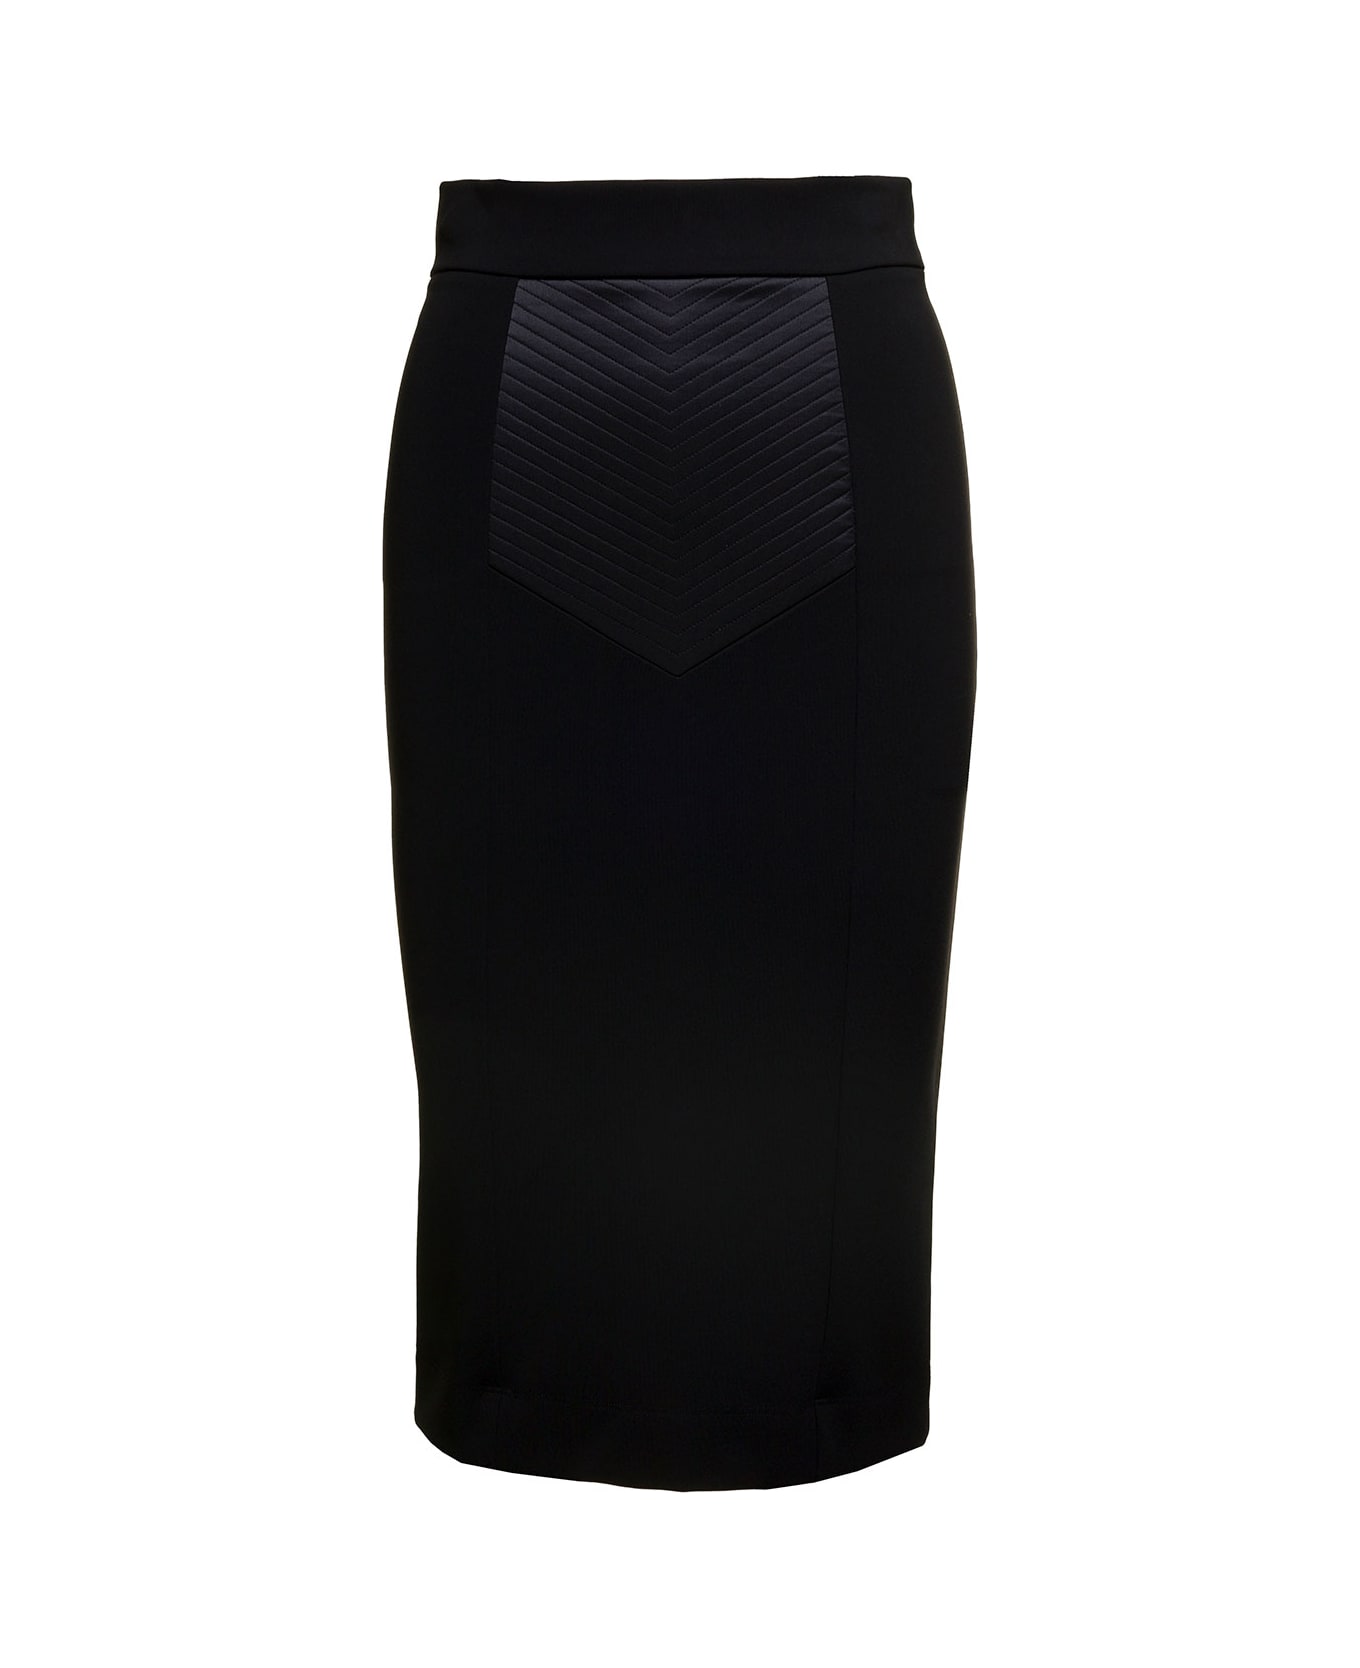 Dolce & Gabbana Midi Black Skirt With Quilted Detail In Fabric Woman - Black